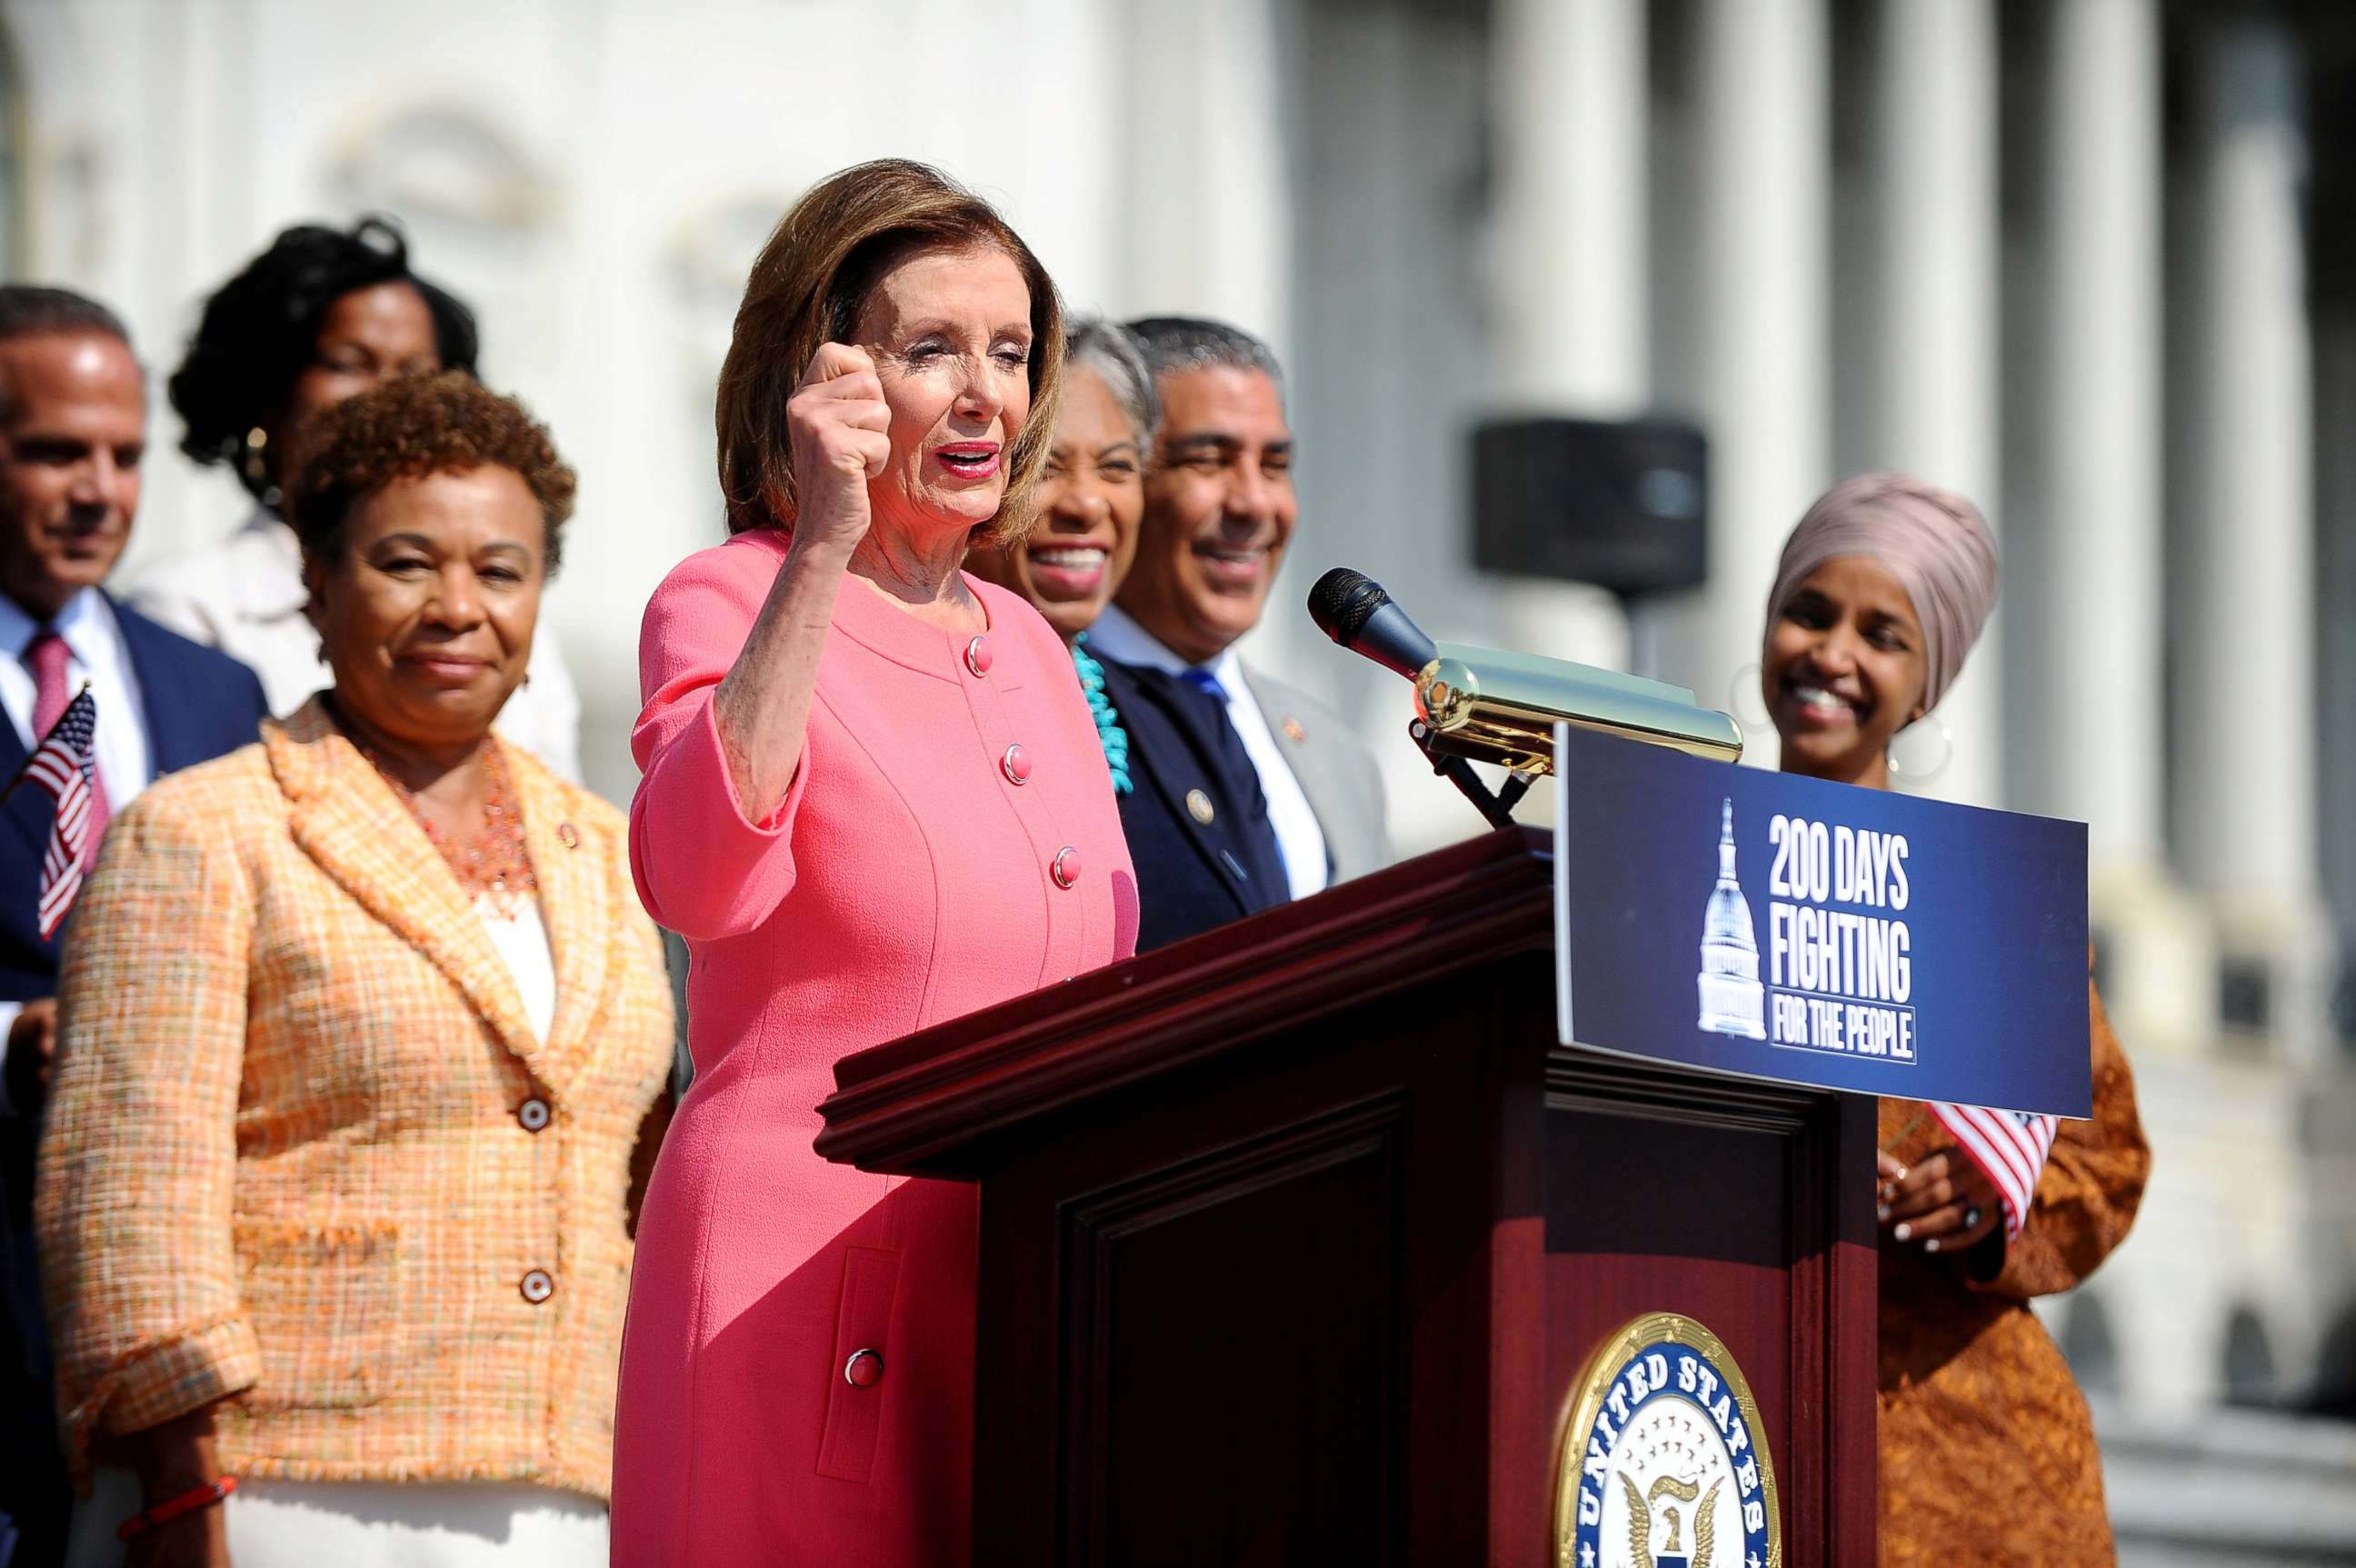 PHOTO: Speaker of the House Nancy Pelosi holds a press event on the first 200 days of the 116th Congress at the Capitol in Washington, D.C., July 25, 2019. 